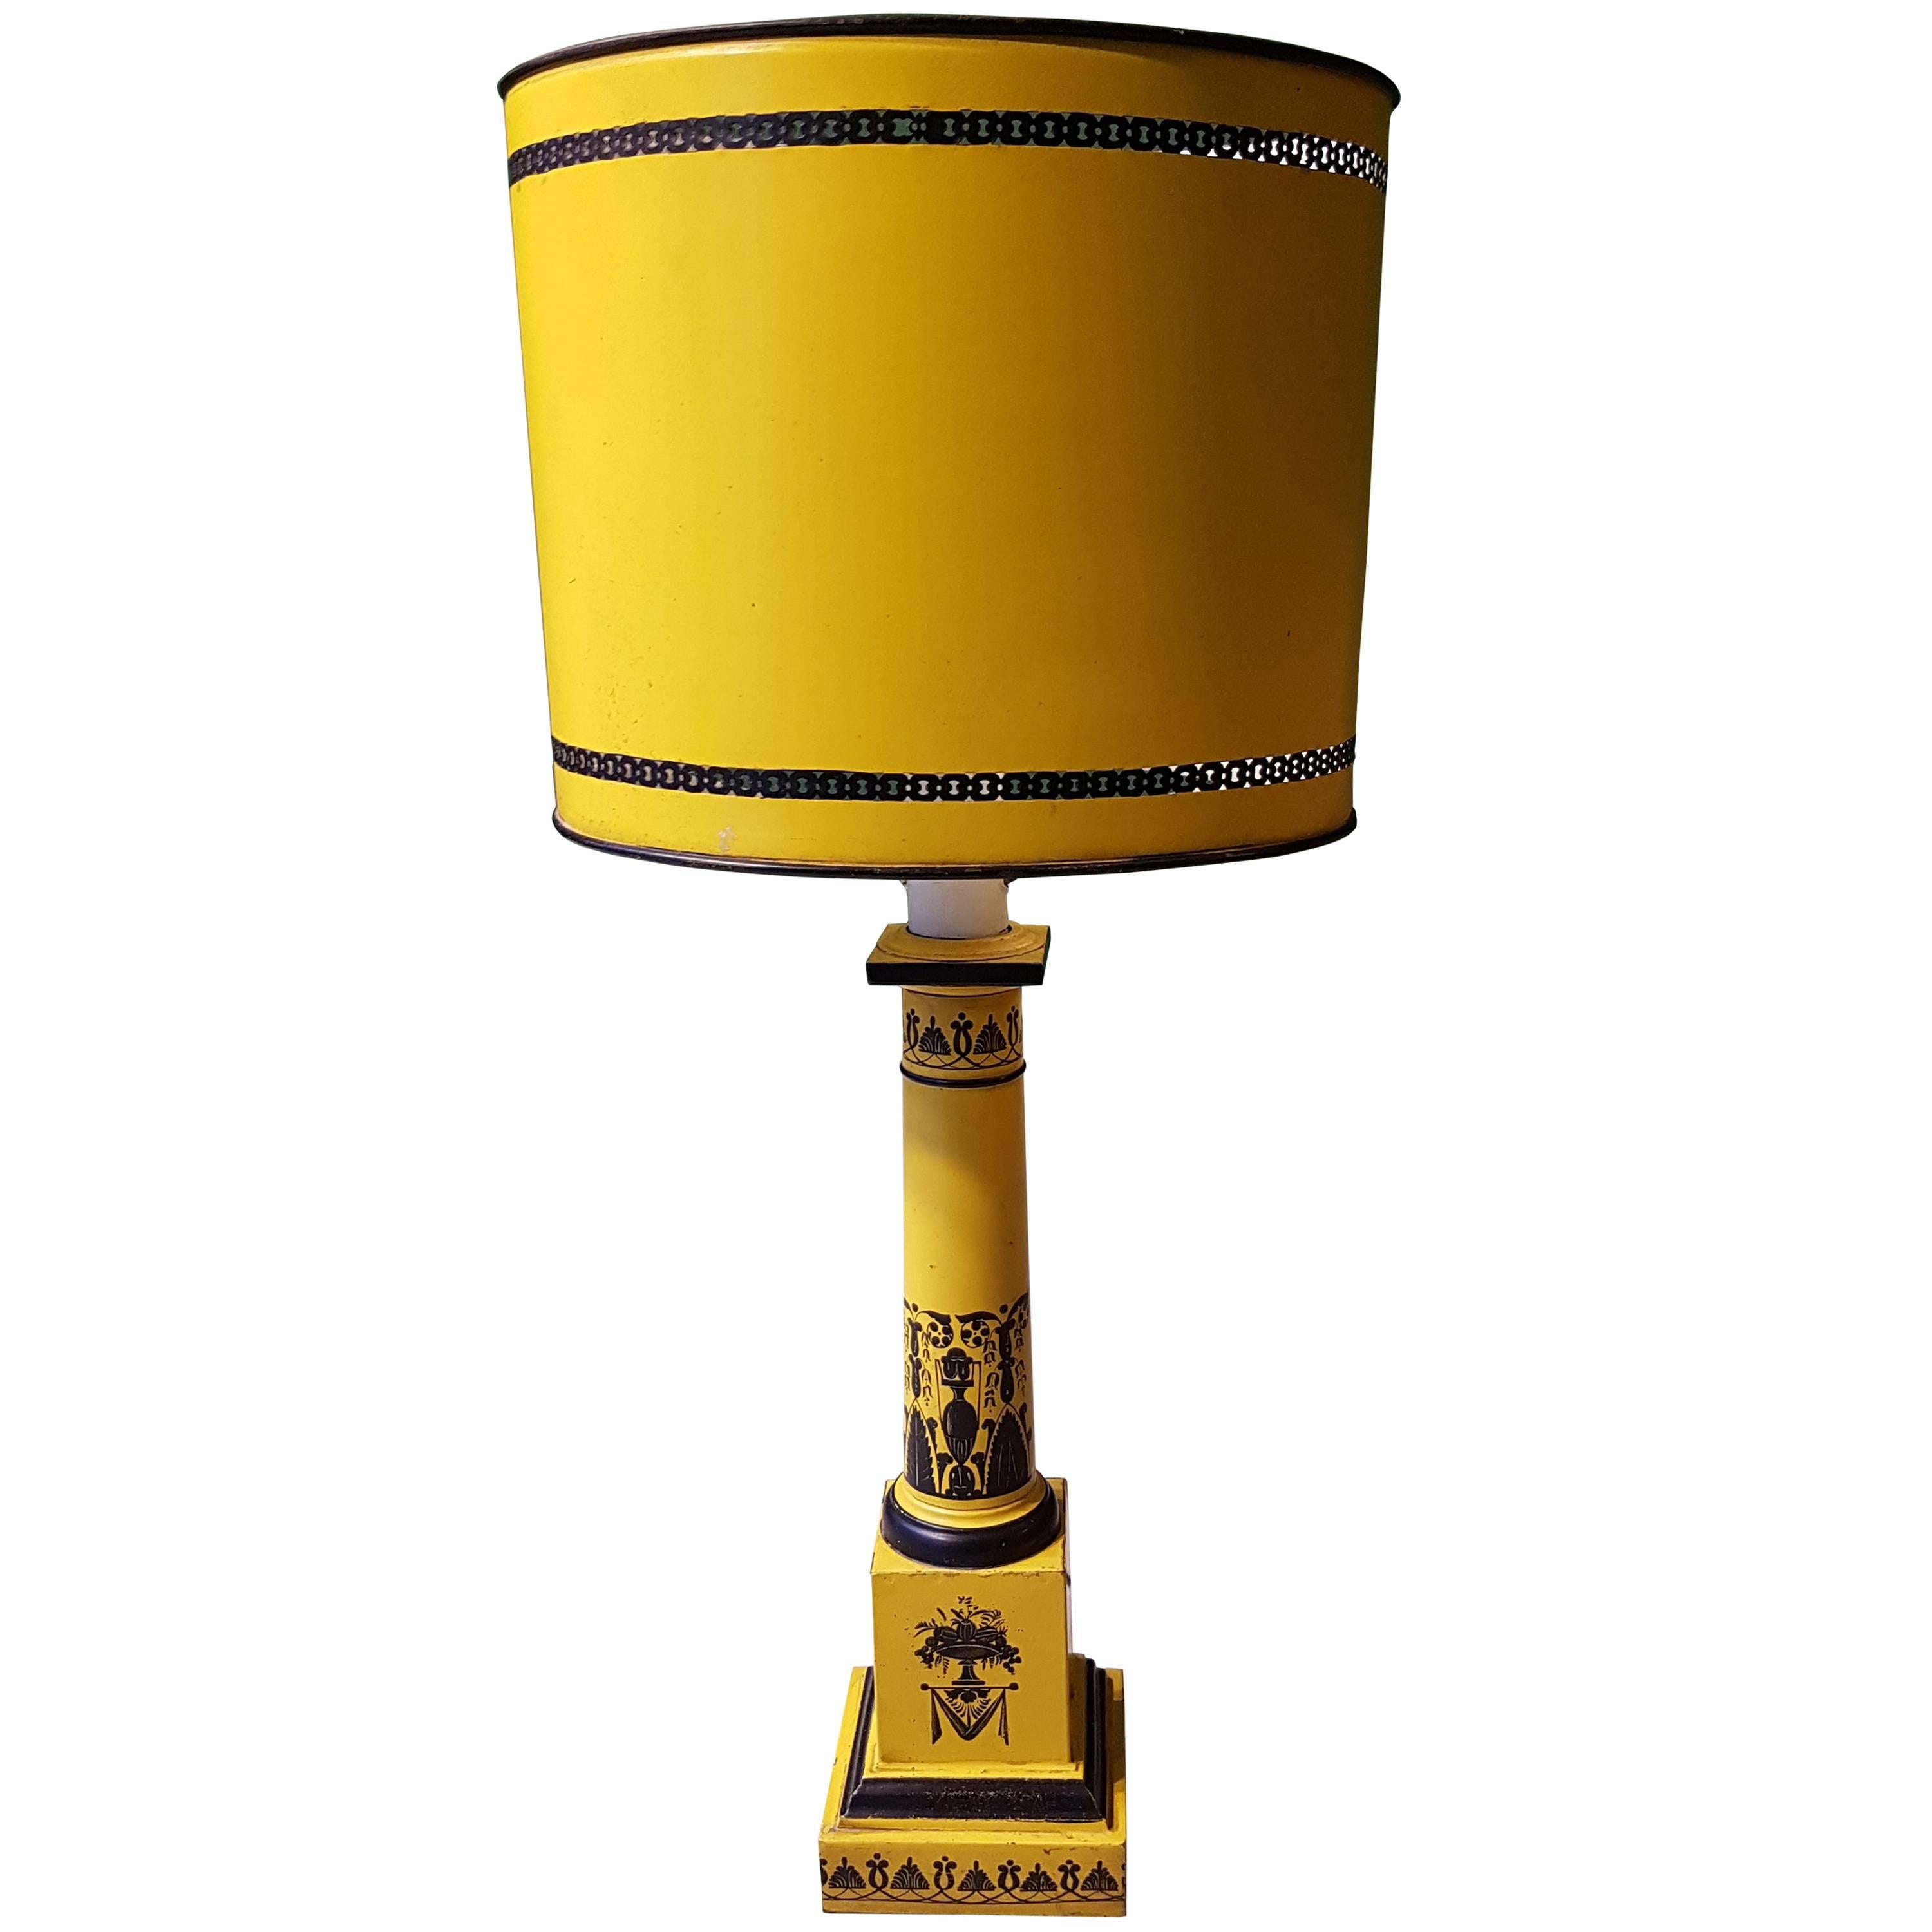 Early 20th Century French Yellow and Black Directoire Style Lamp Made of Metal  For Sale